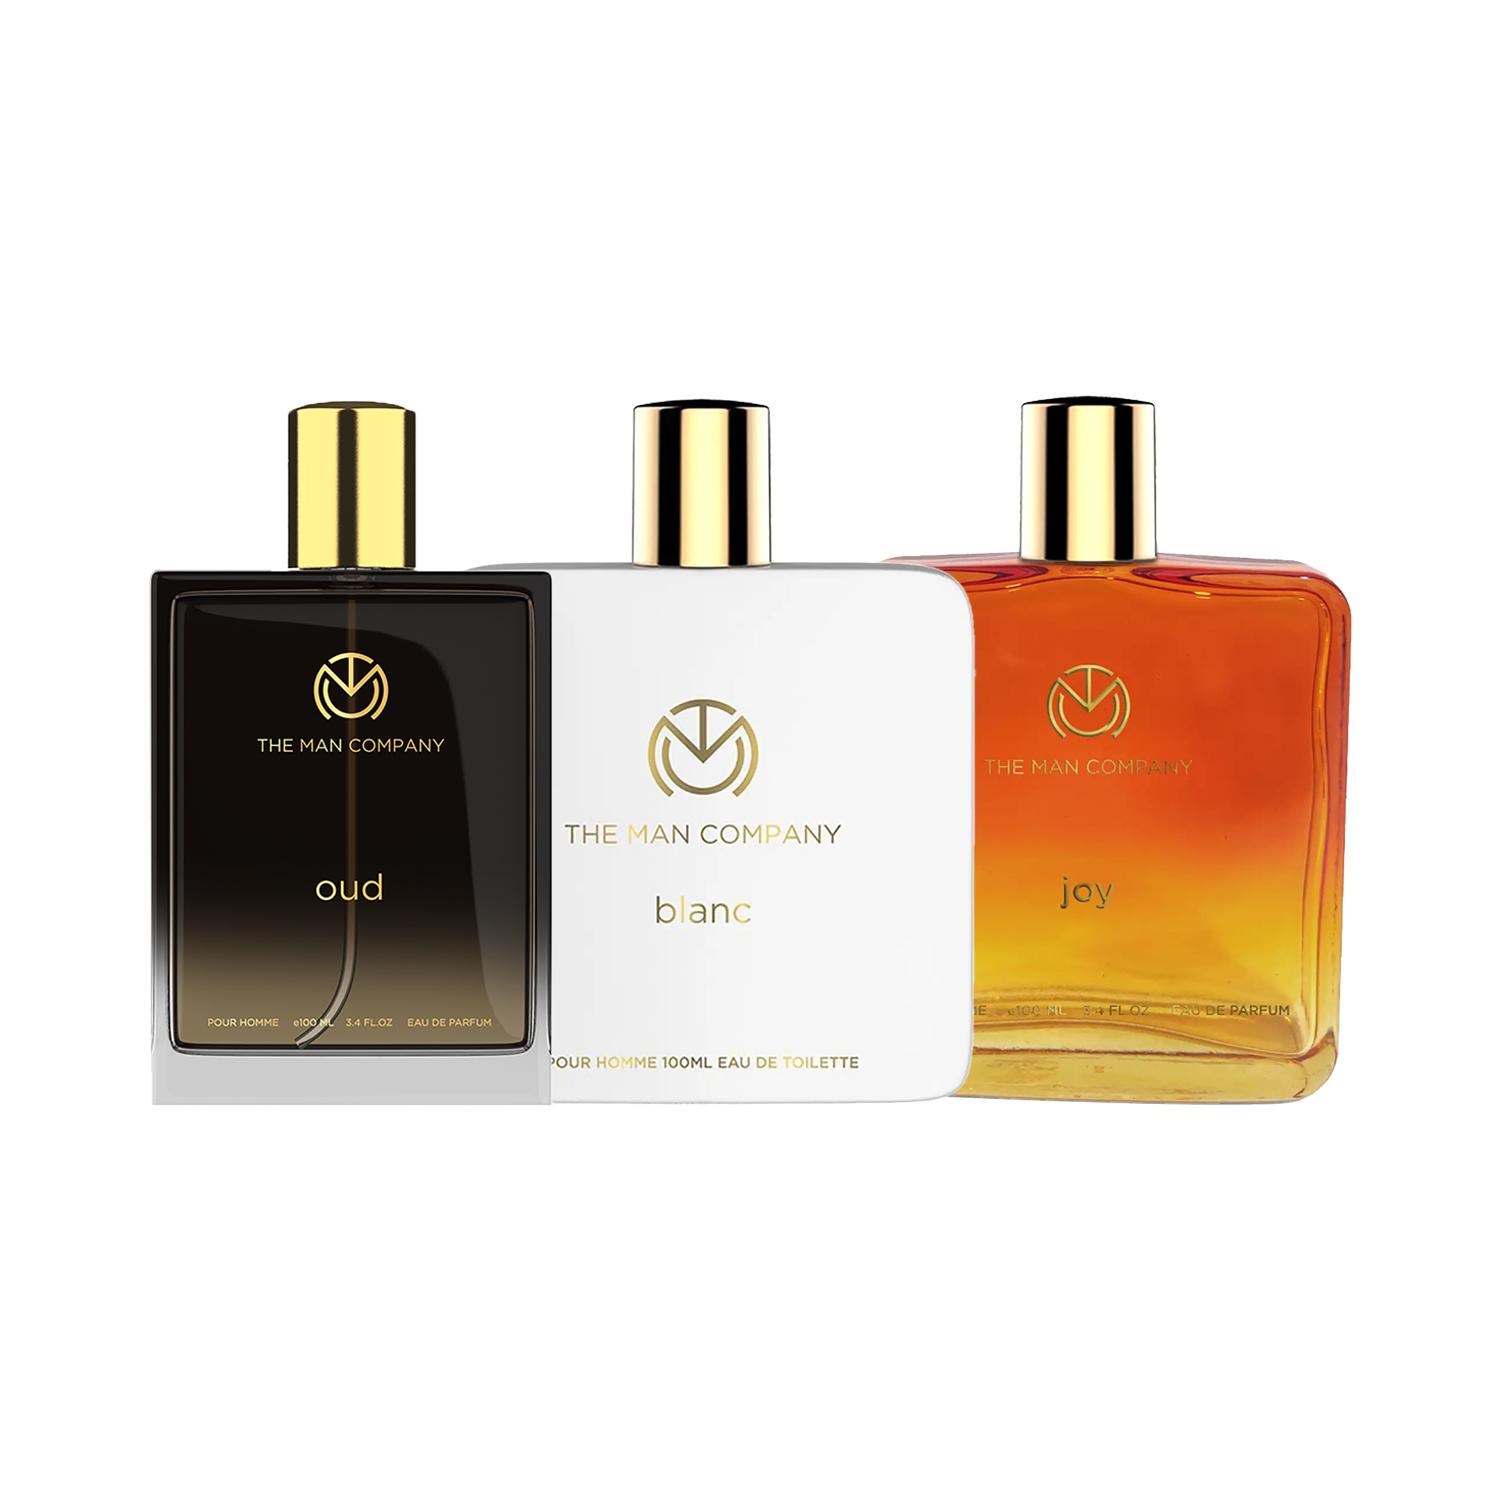 The Man Company | The Man Company Specially Curated Perfume Gift for Him - (3 x 100 ml) Combo